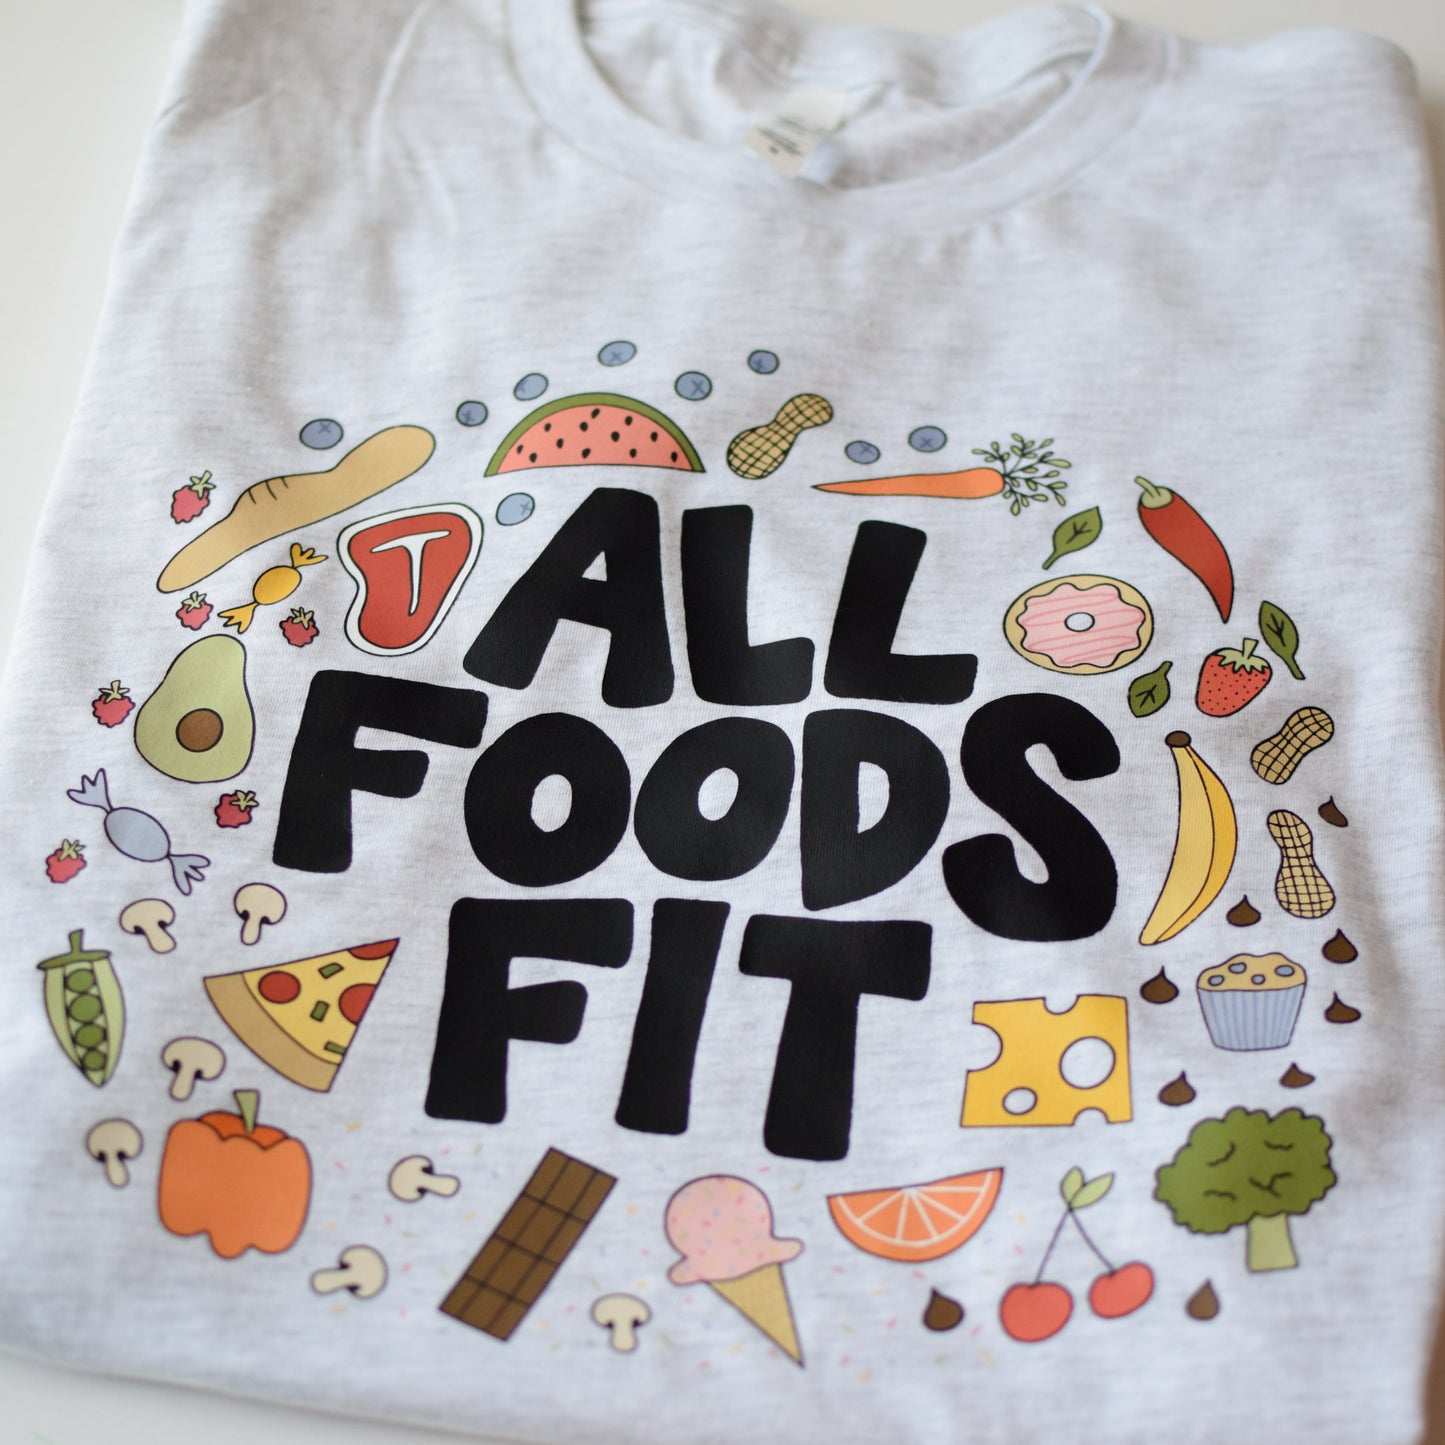 All Foods Fit Tee